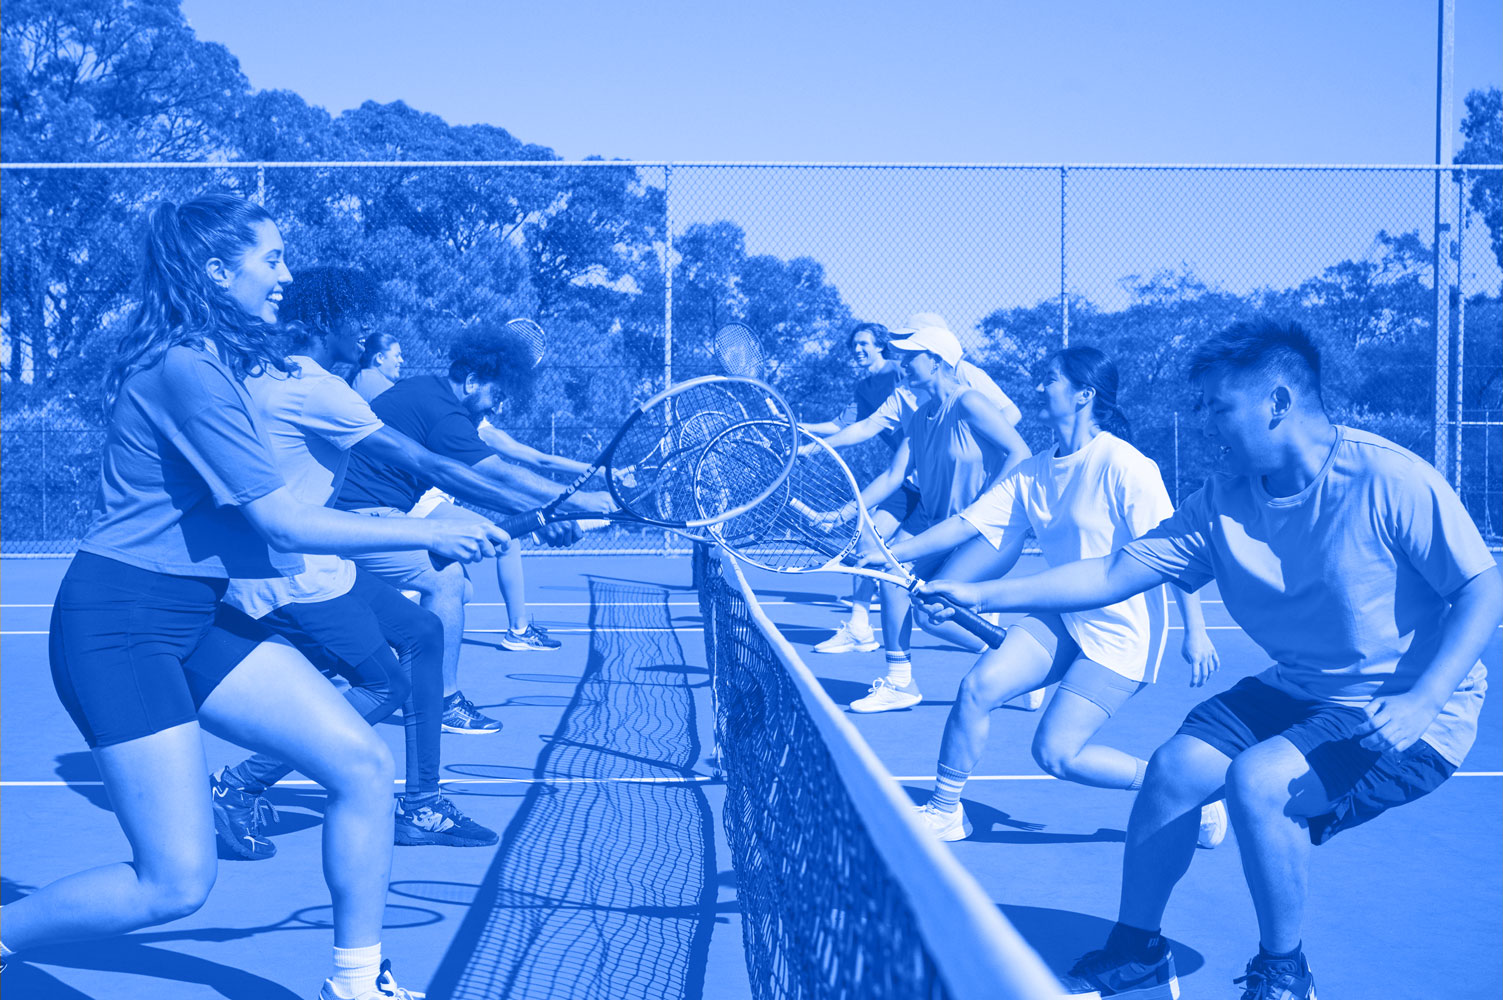 Cardio Tennis | Get Fit and Have Fun | Burleigh Heads Tennis Coaching